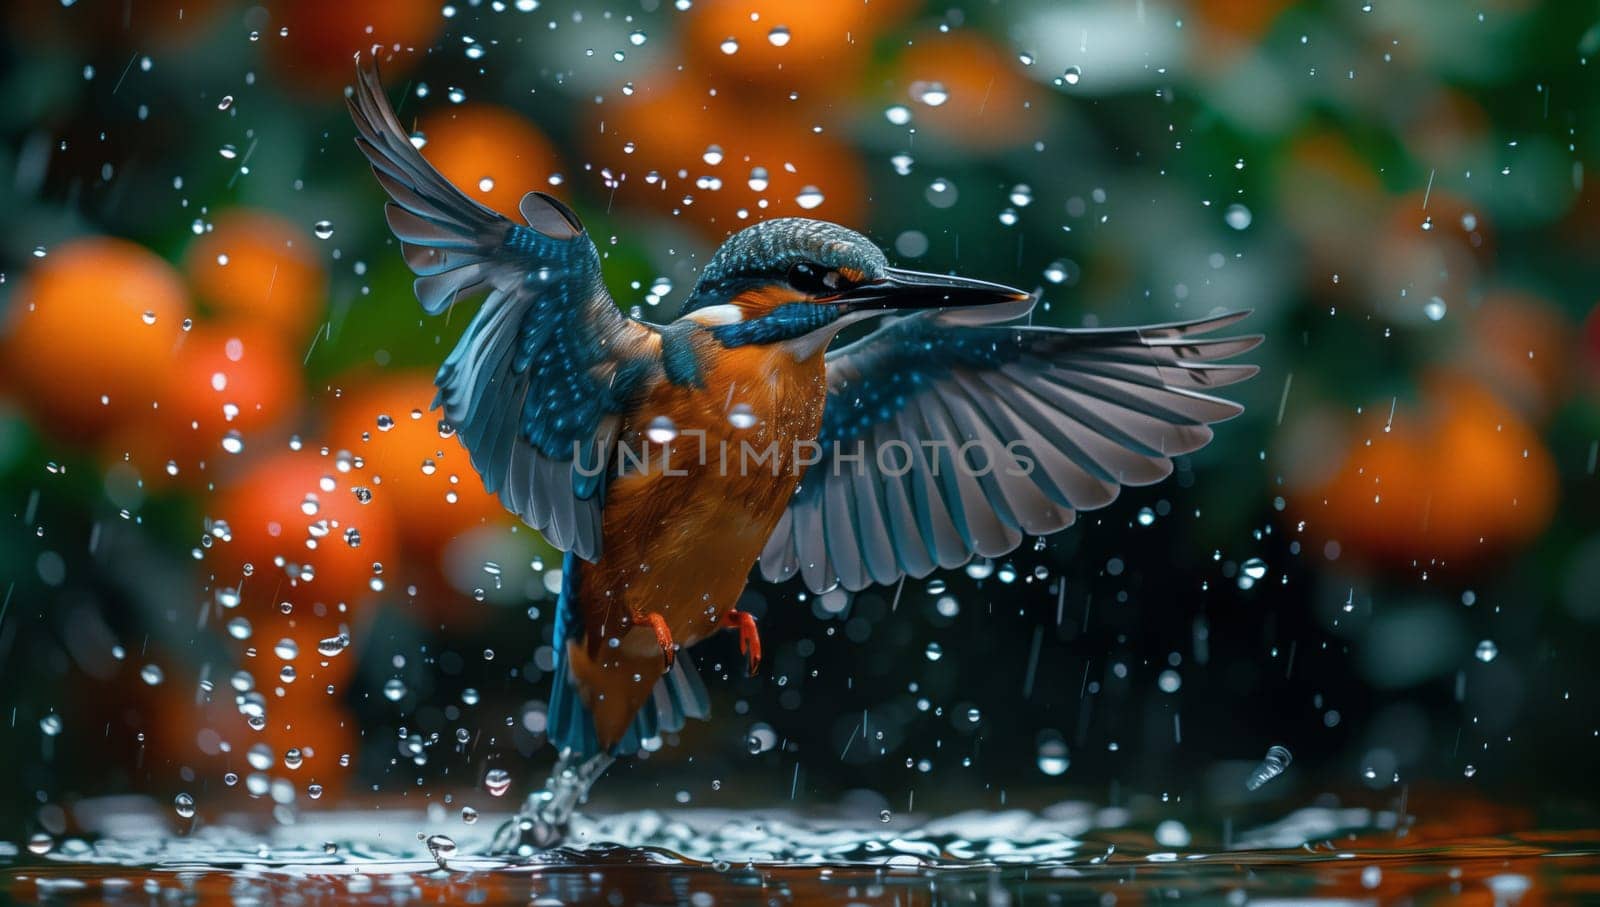 A bird with electric blue feathers flies over water during a rainy event by richwolf